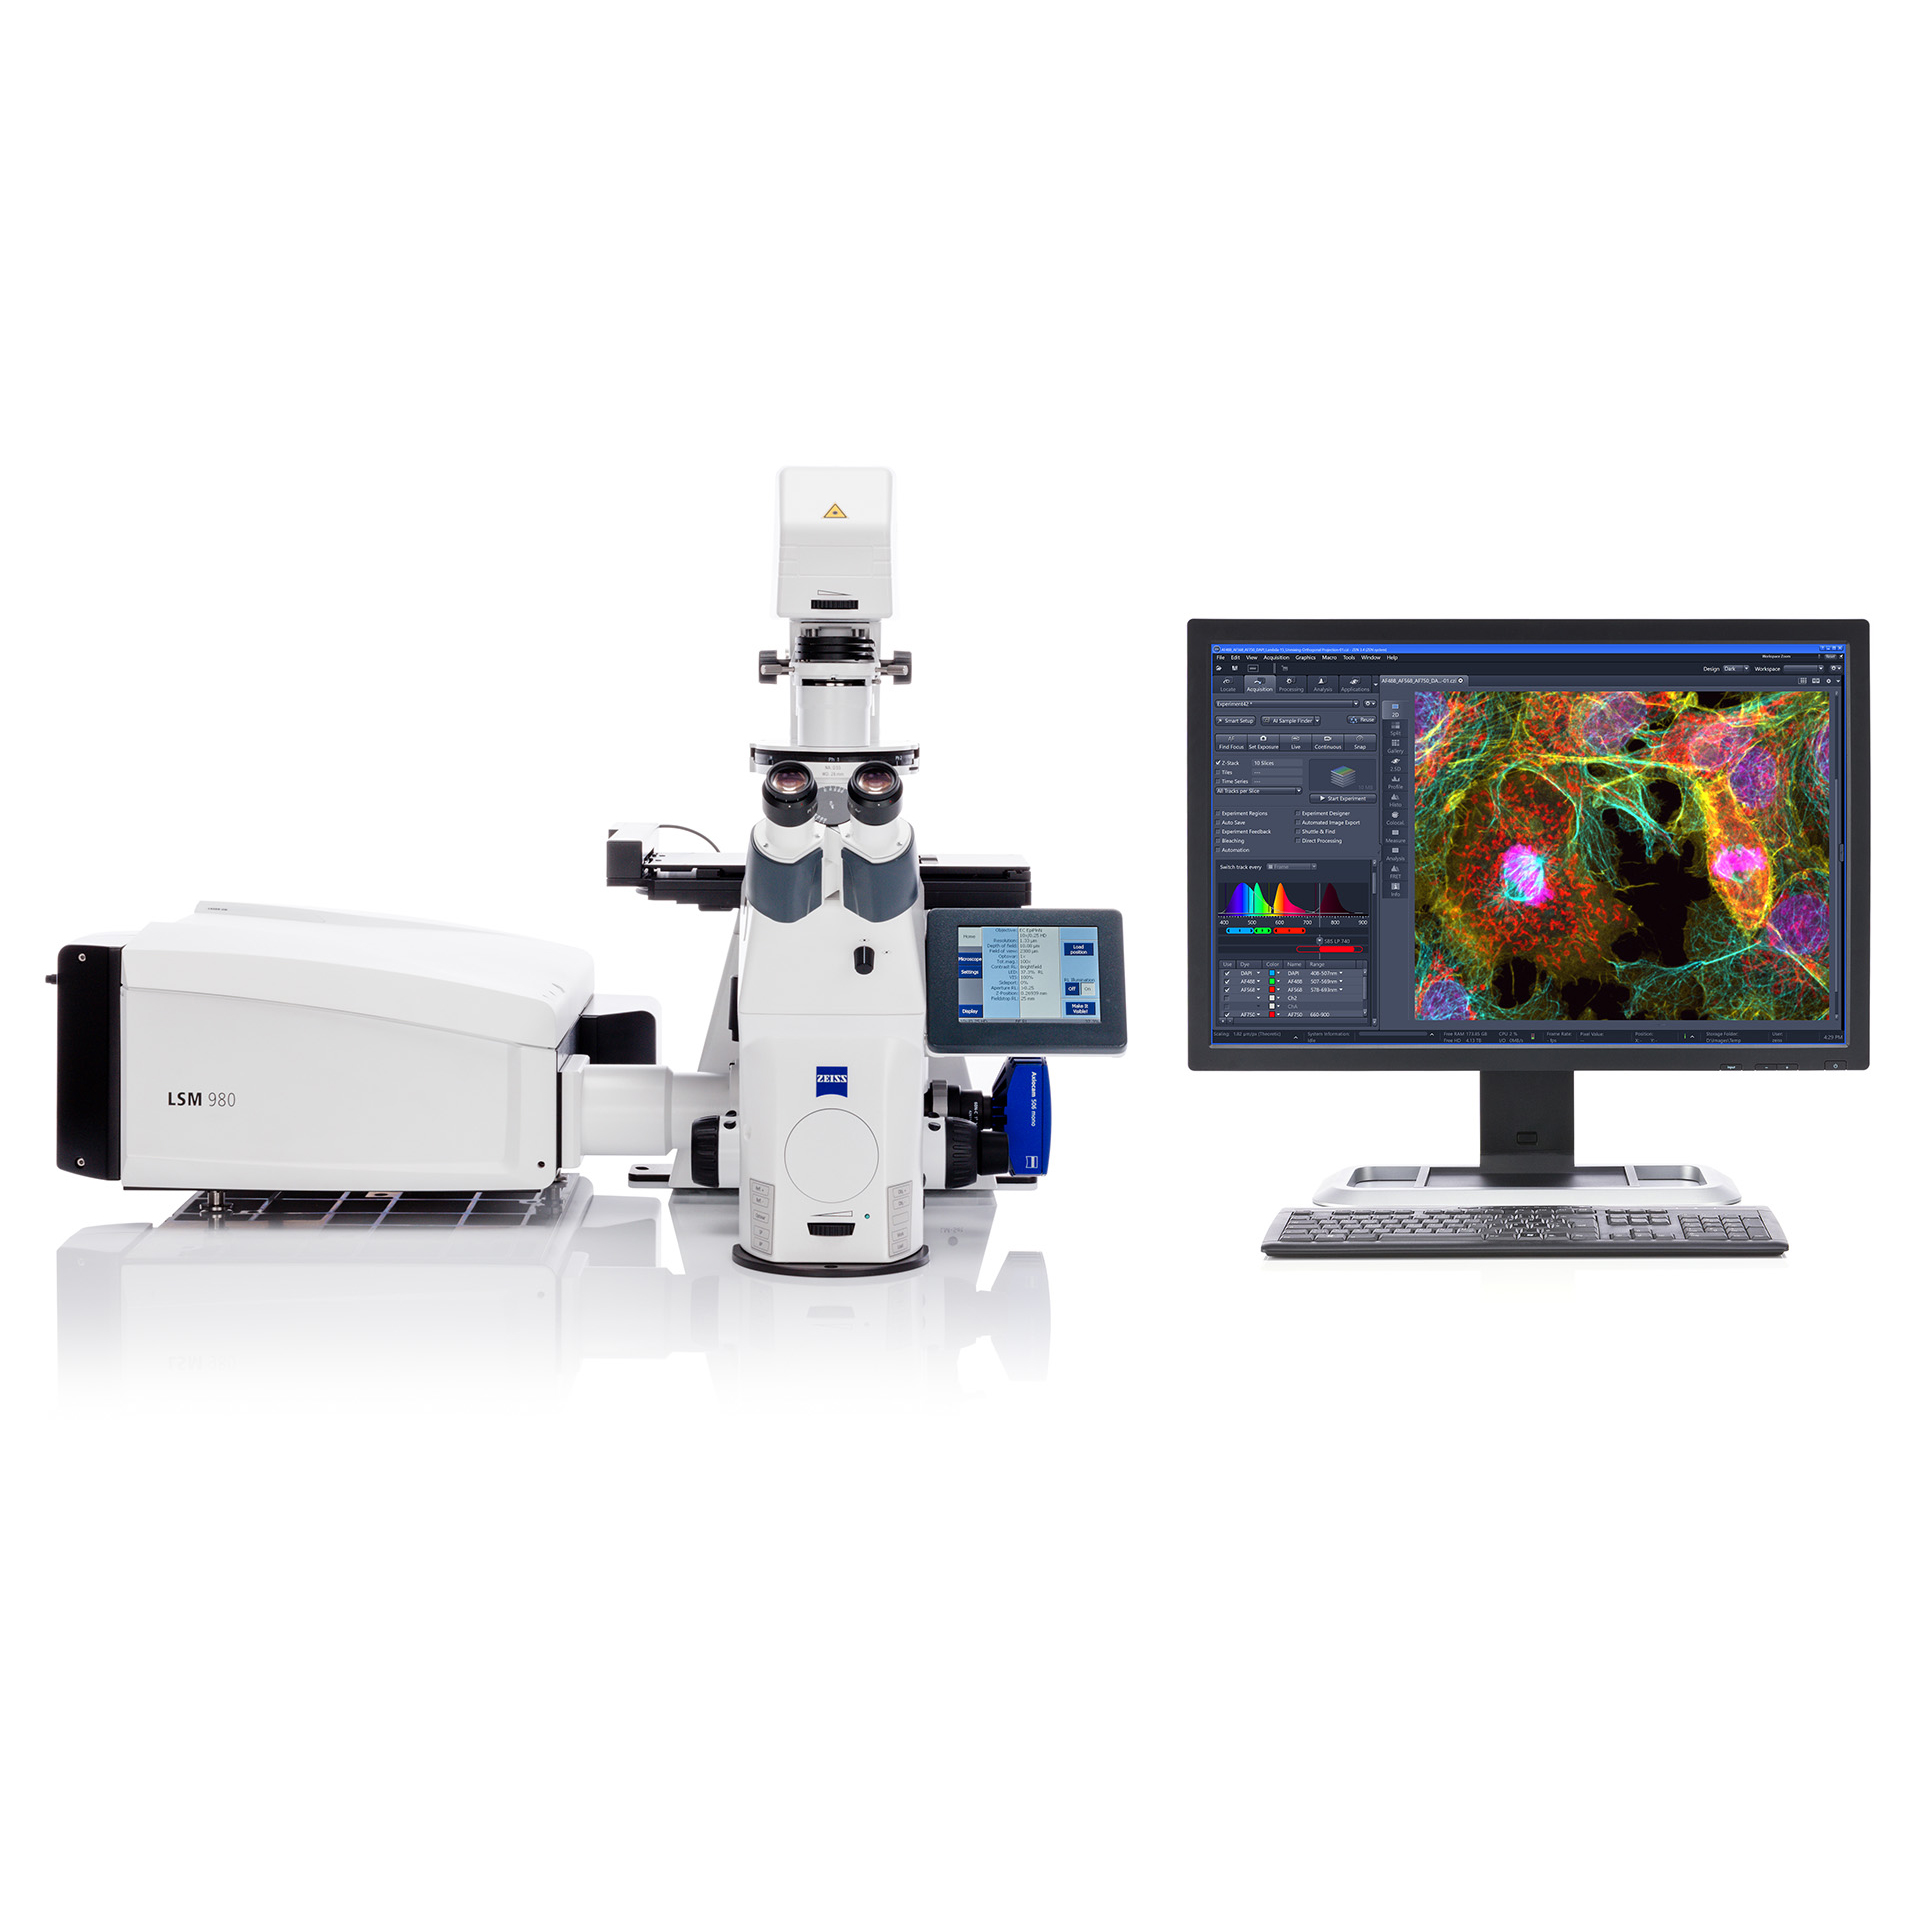 https://www.zeiss.com/content/dam/rms/reference-master/products/light/confocal/lsm-980-airyscan-2/lsm-980-airyscan-stage.jpg